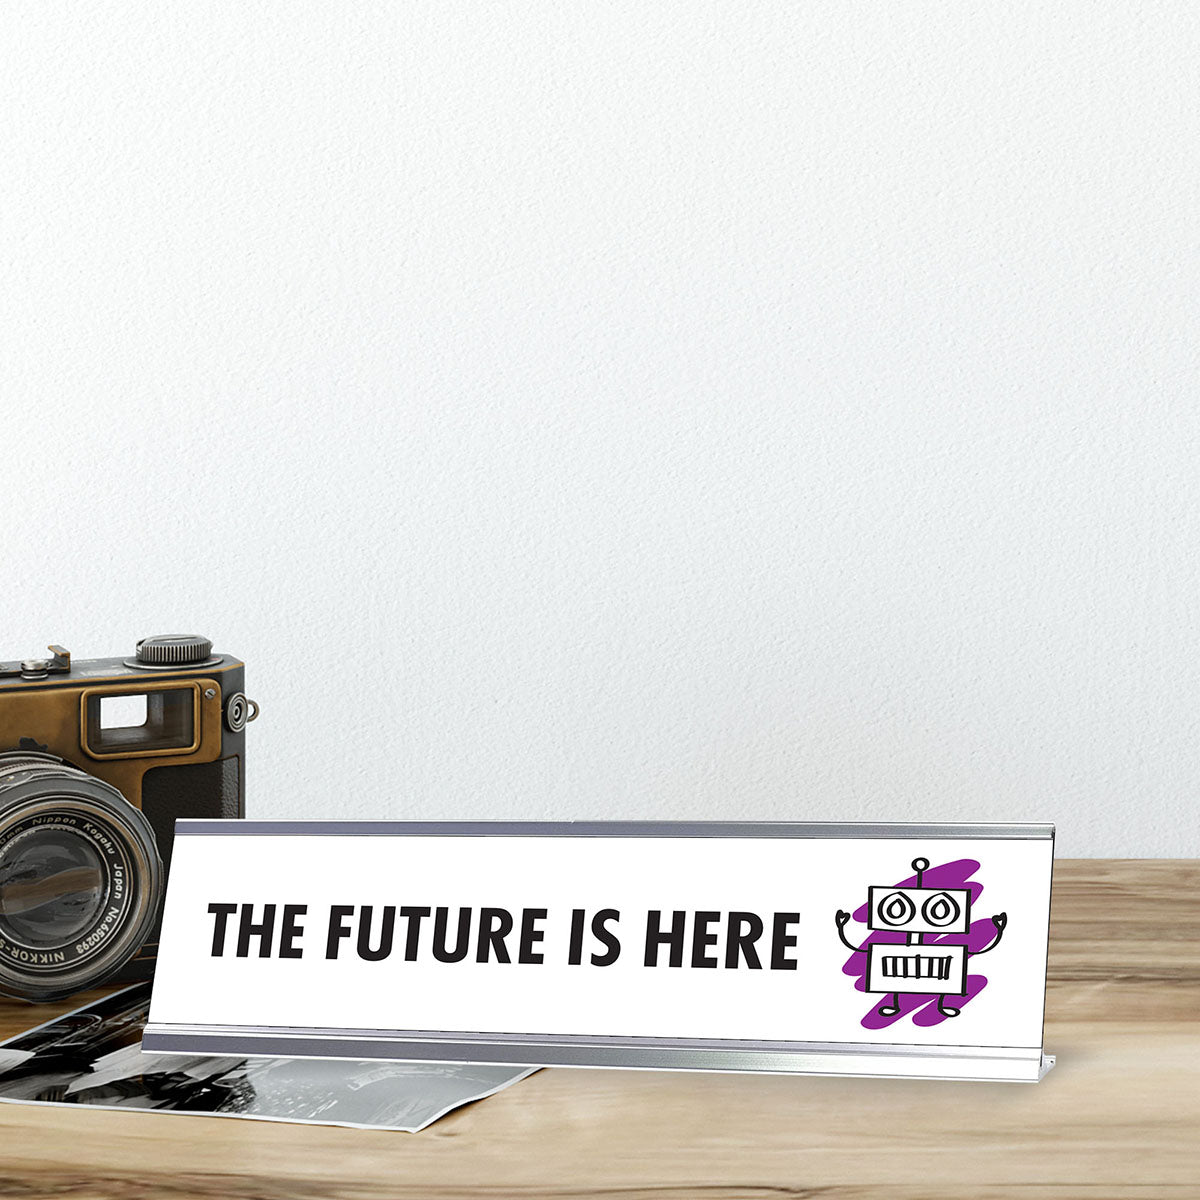 The Future Is Here, Stick People Series Desk Sign (2 x 8")